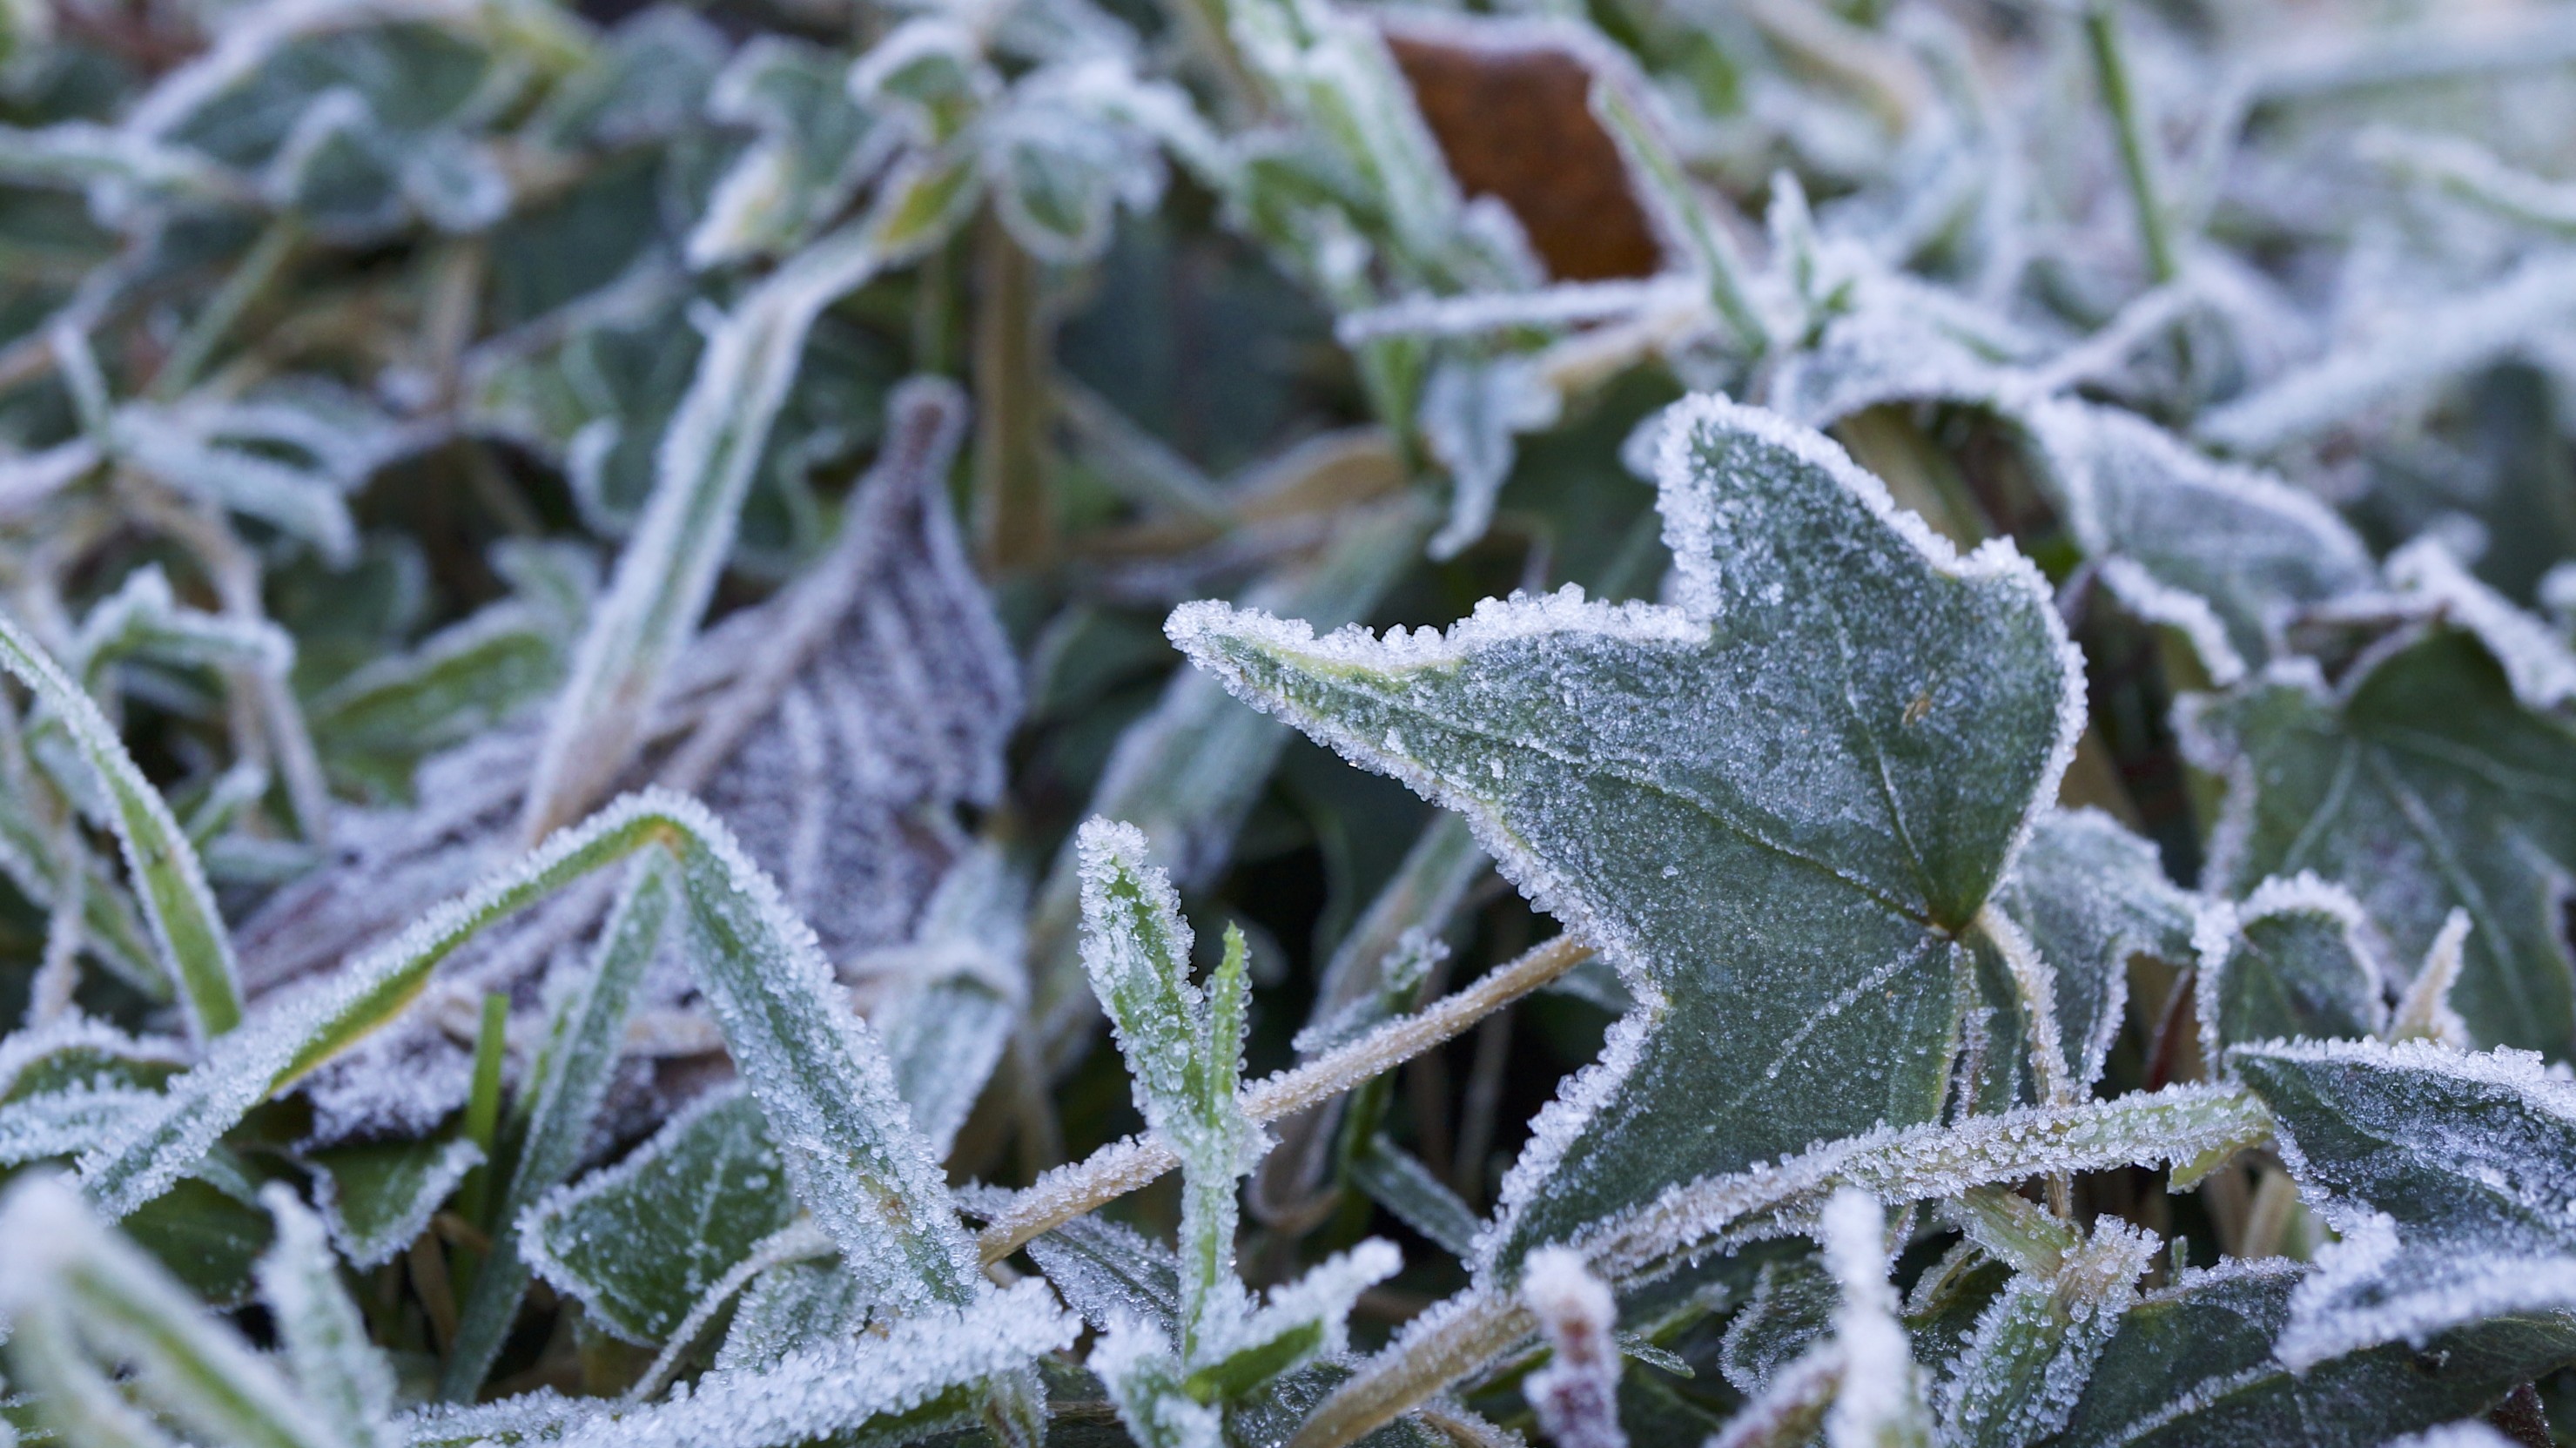 Frost-covered garden path glistening in the morning light, showcasing the winter’s icy touch on leaves and soil.